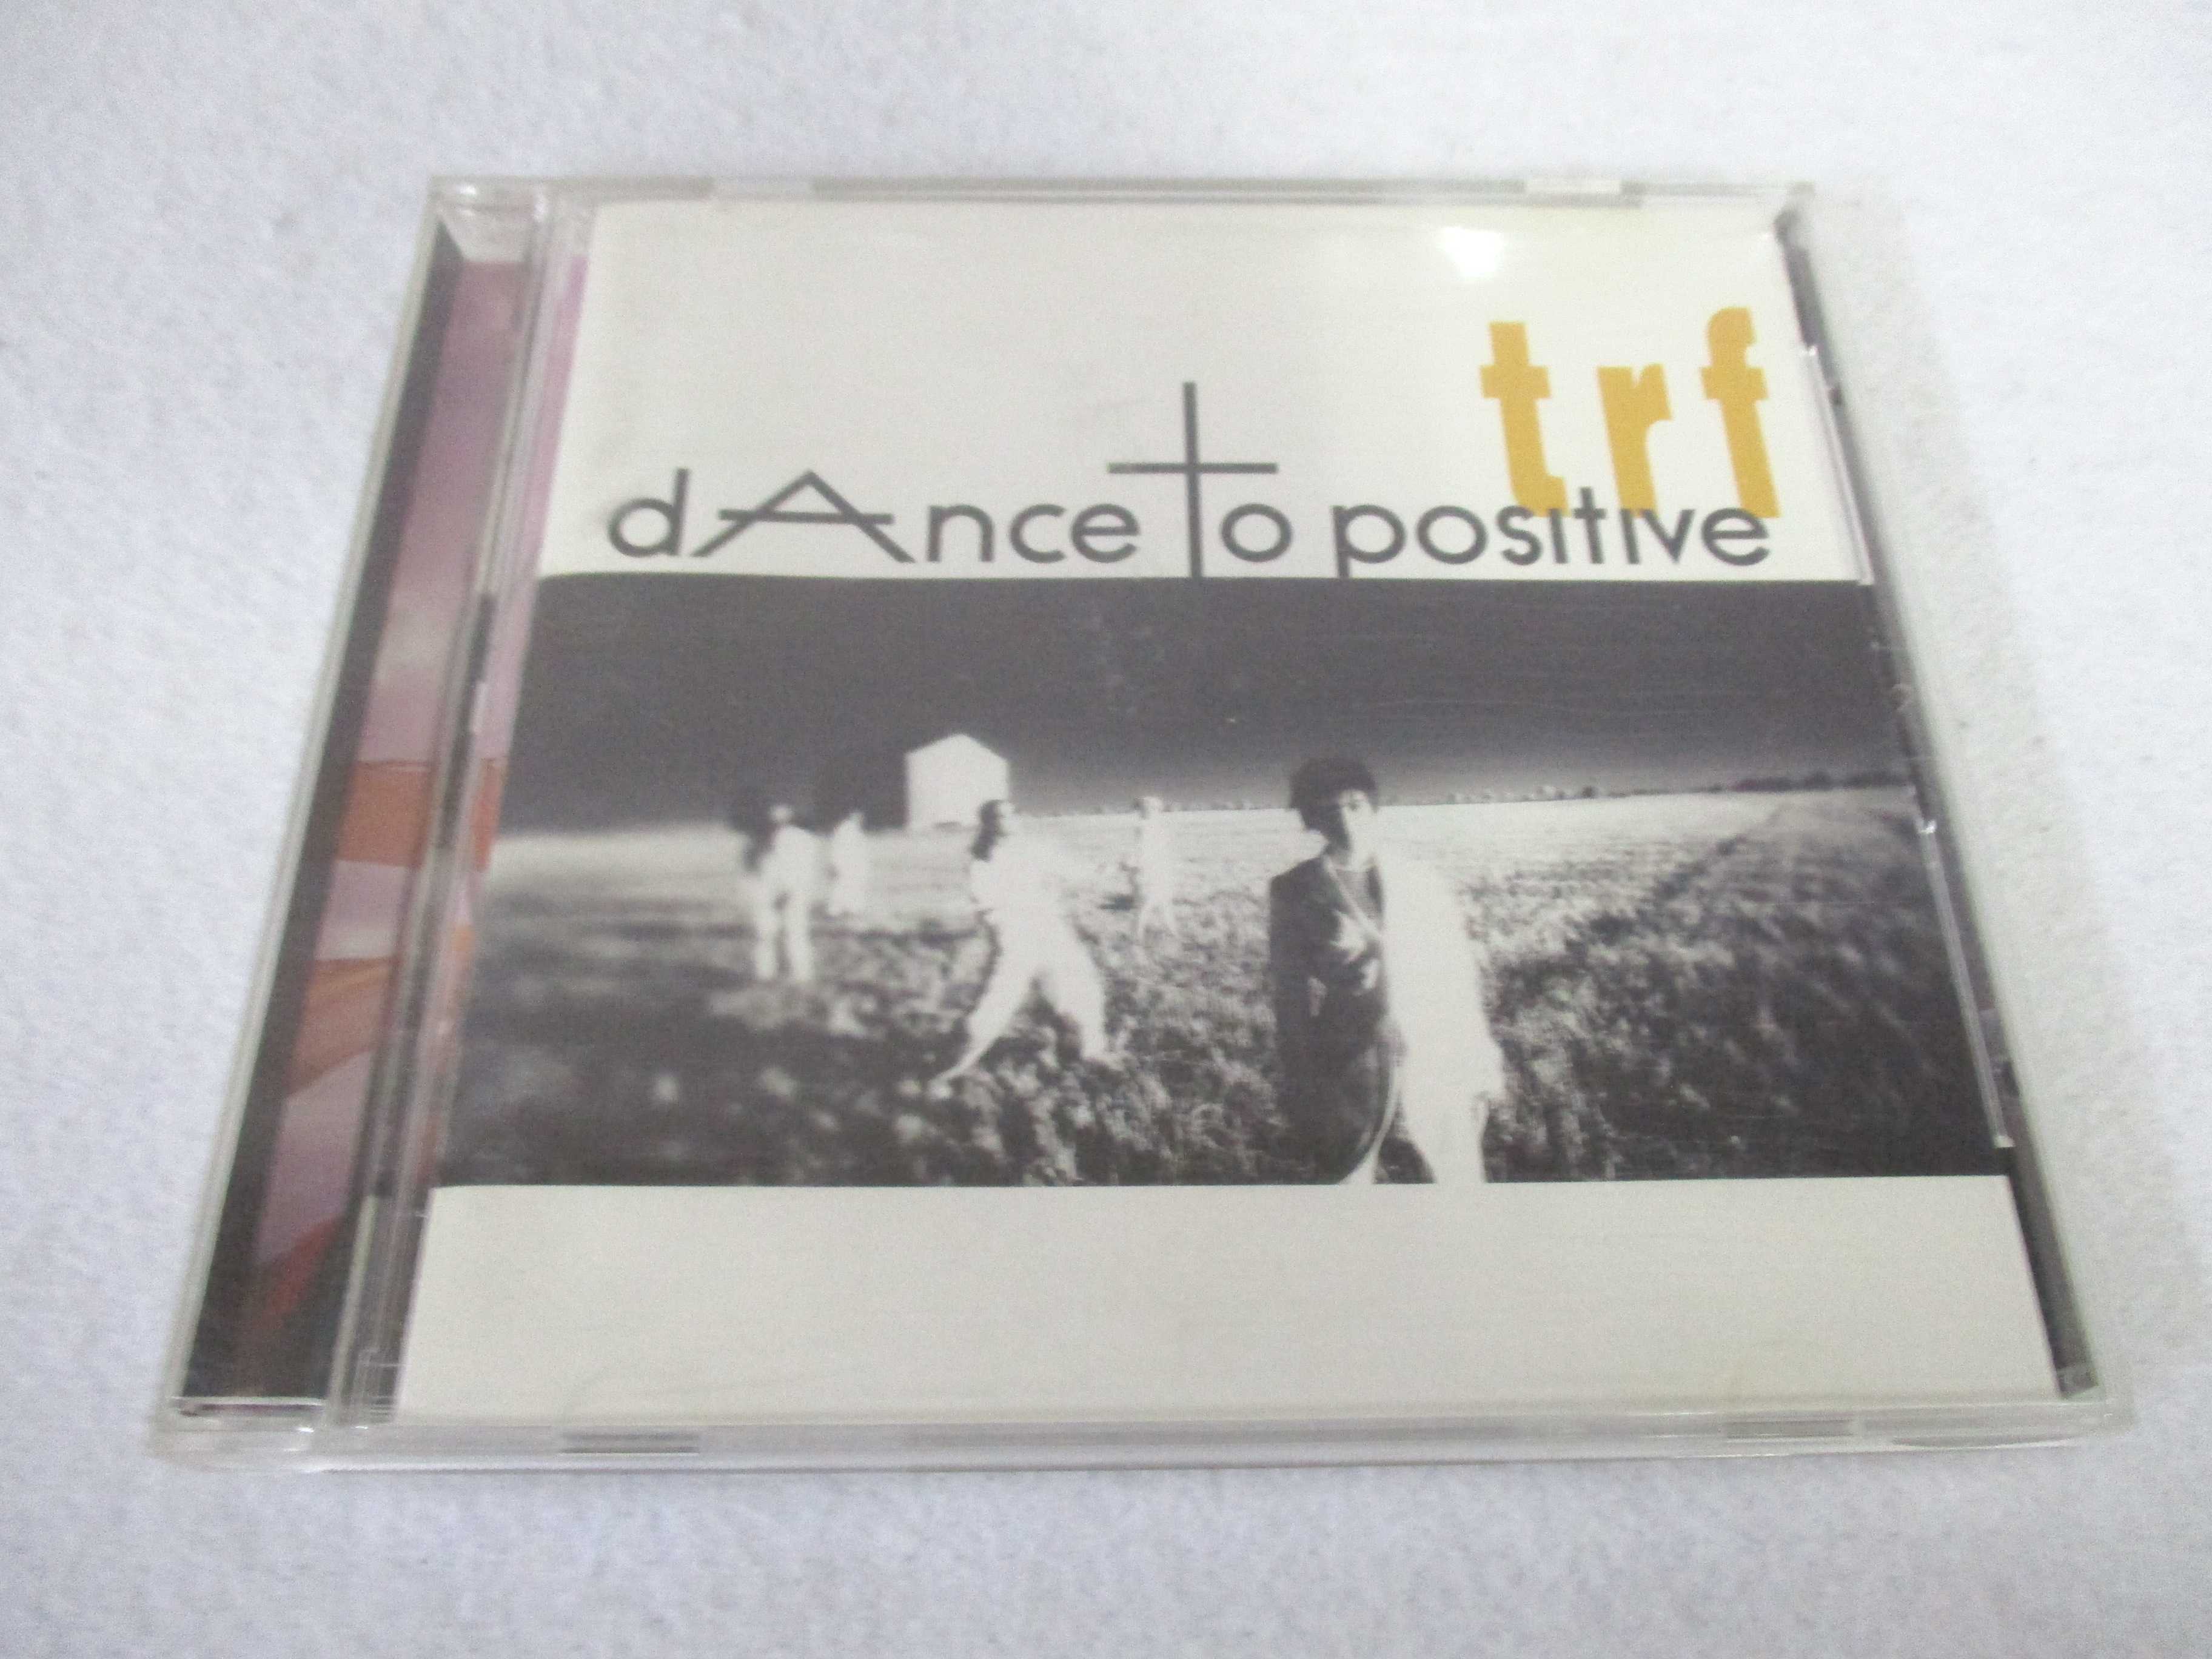 AC05908 【中古】 【CD】 dAnce to positive/trf